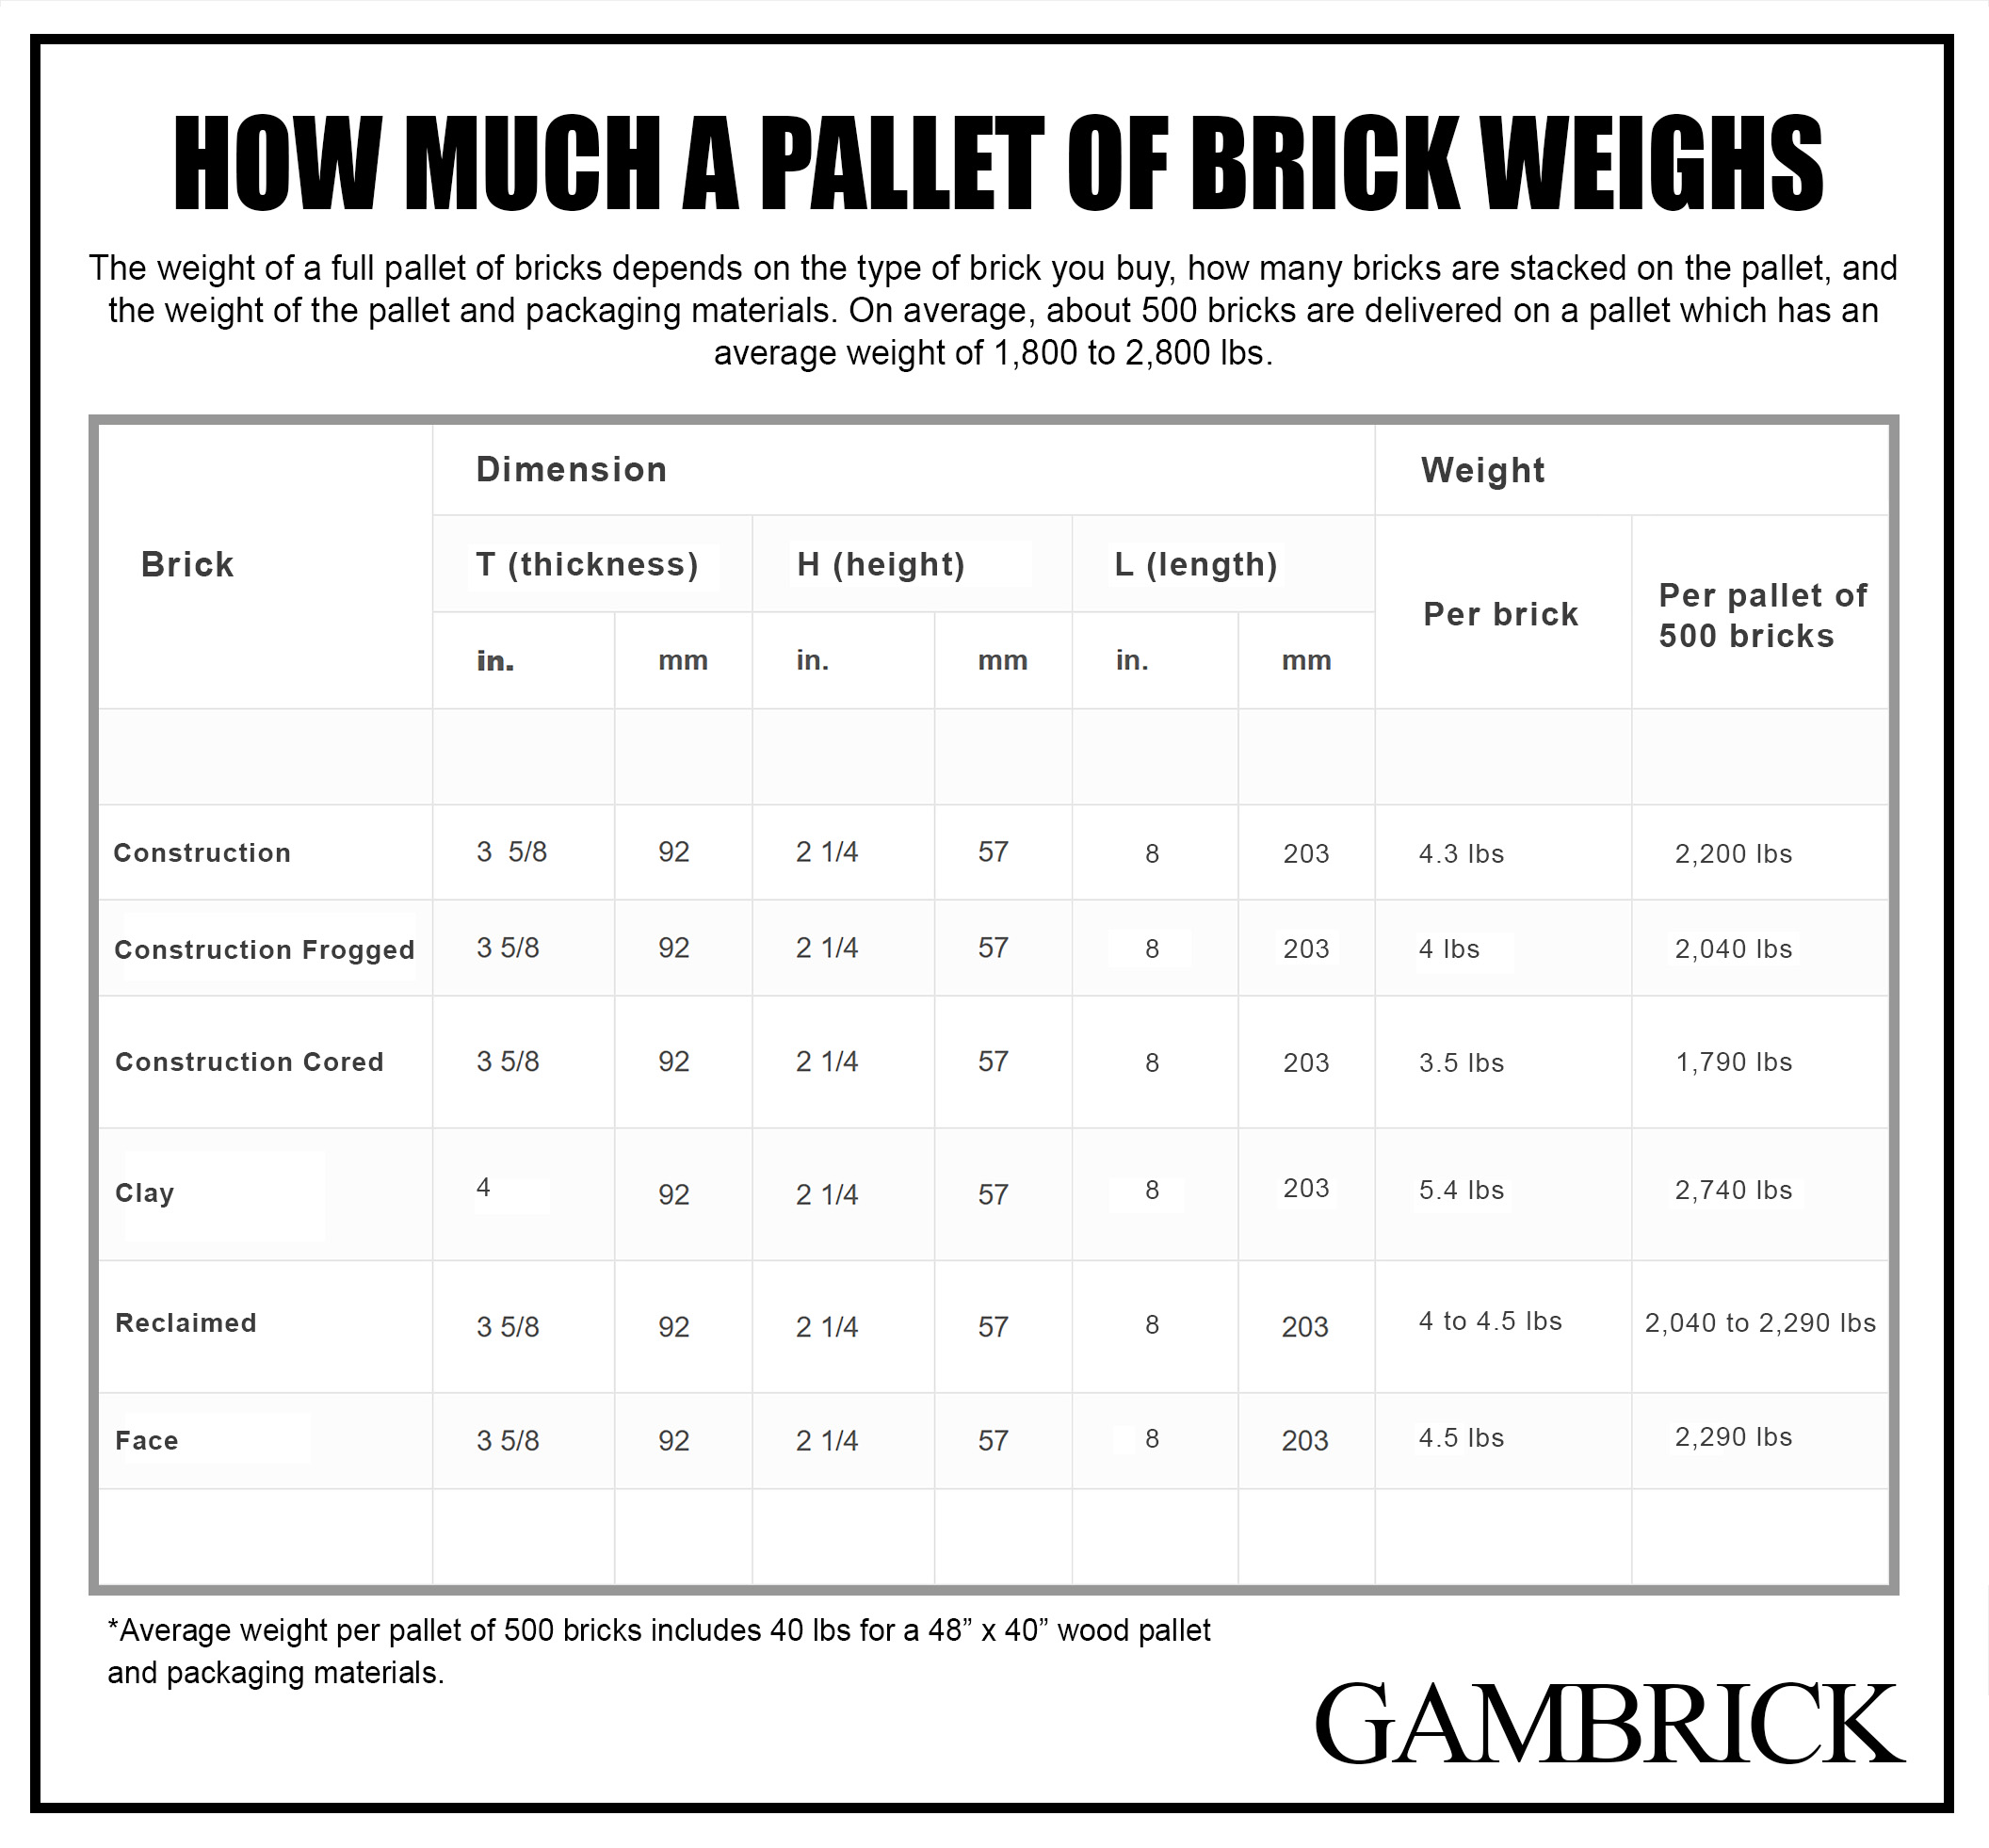 how much a pallet of bricks weighs infographic diagram 1.0